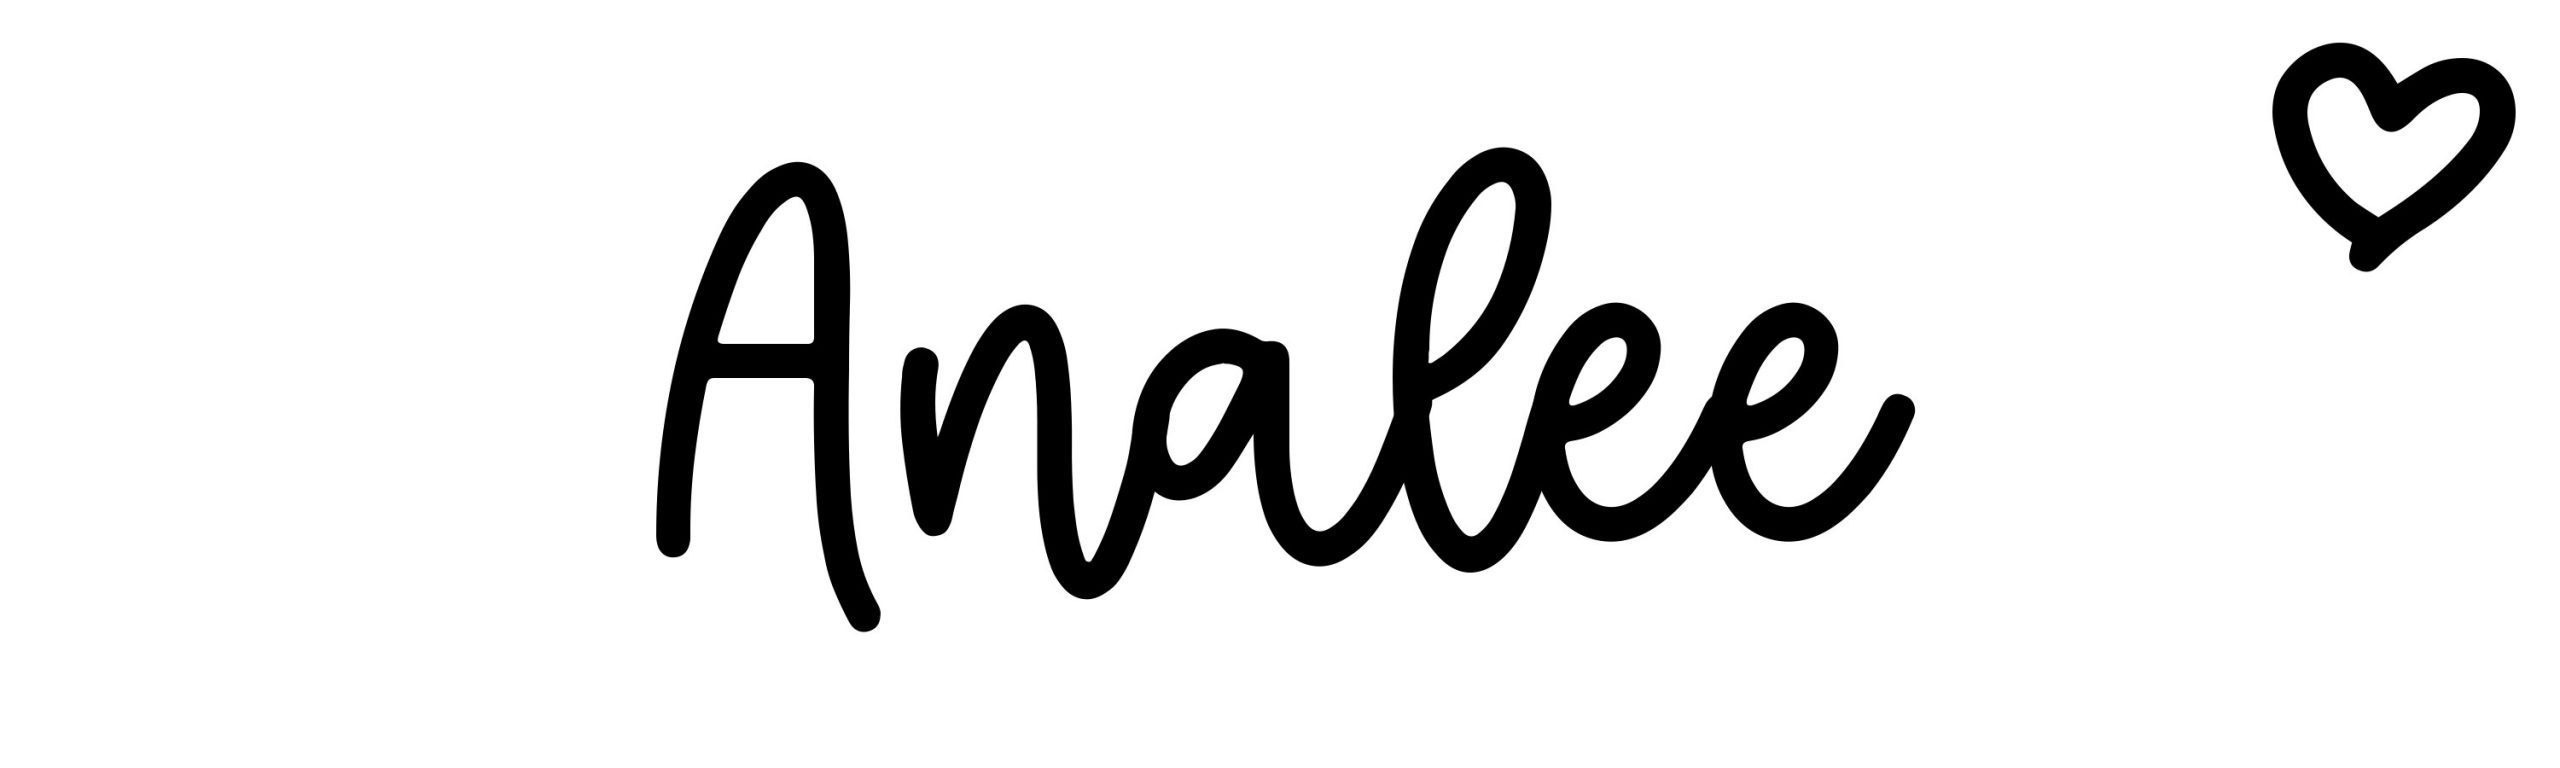 Analee - Name meaning, origin, variations and more